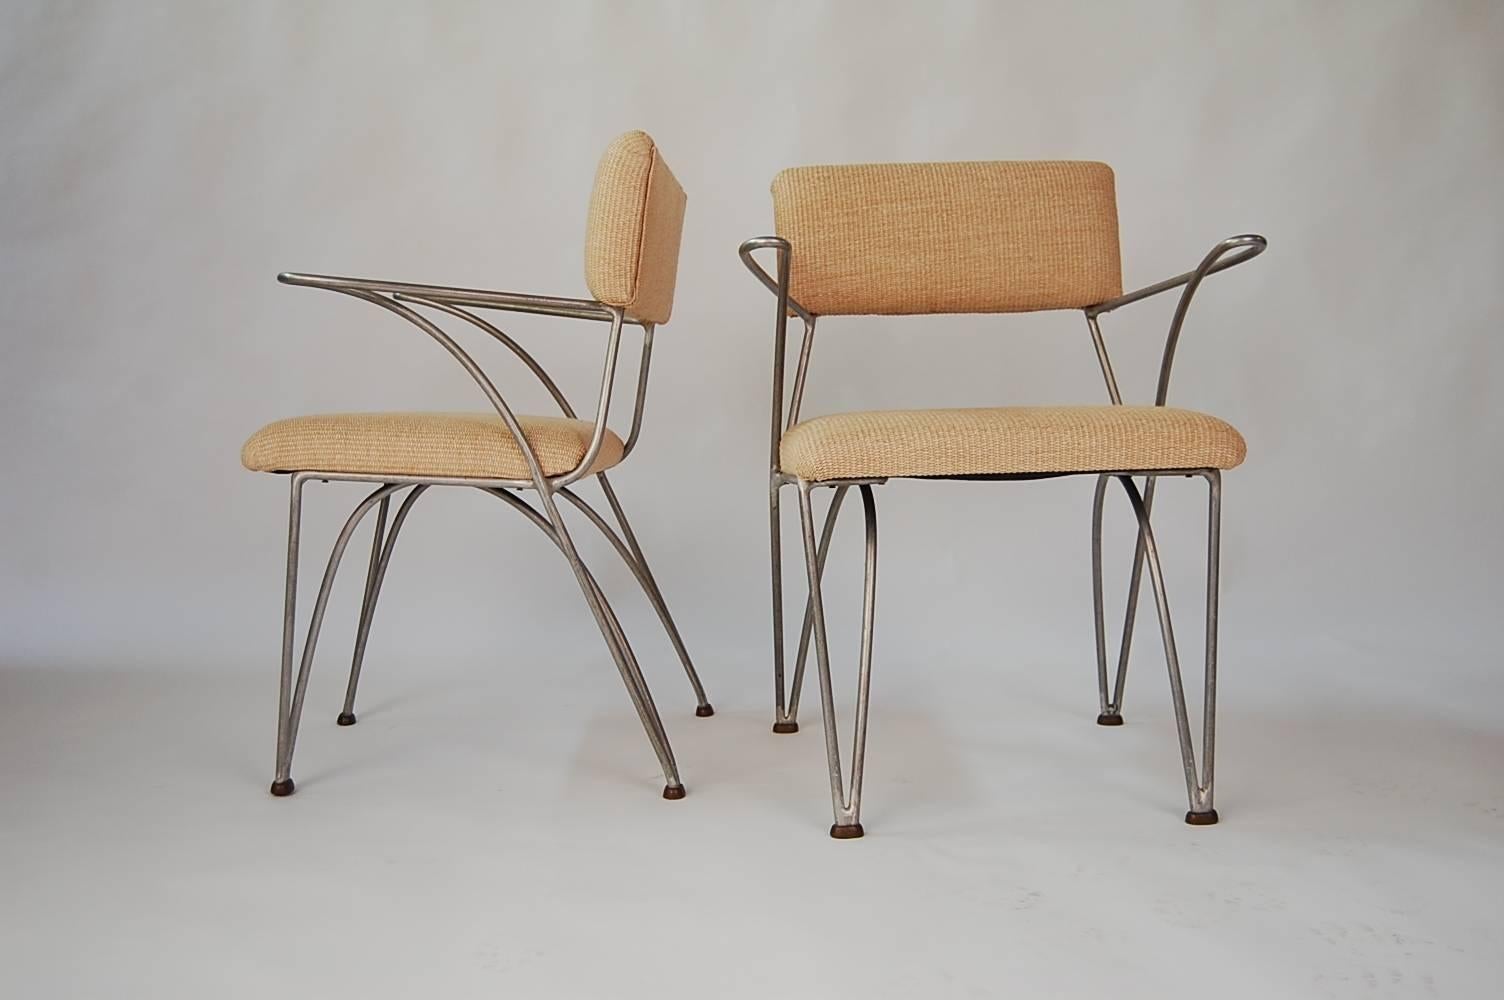 Pair of modernist chairs, circa 1950. We have been unable to document these chairs, but feel very strongly that they are an example early California modern design. They are constructed of solid, round rod aluminum, and have bronze feet. Upholstery